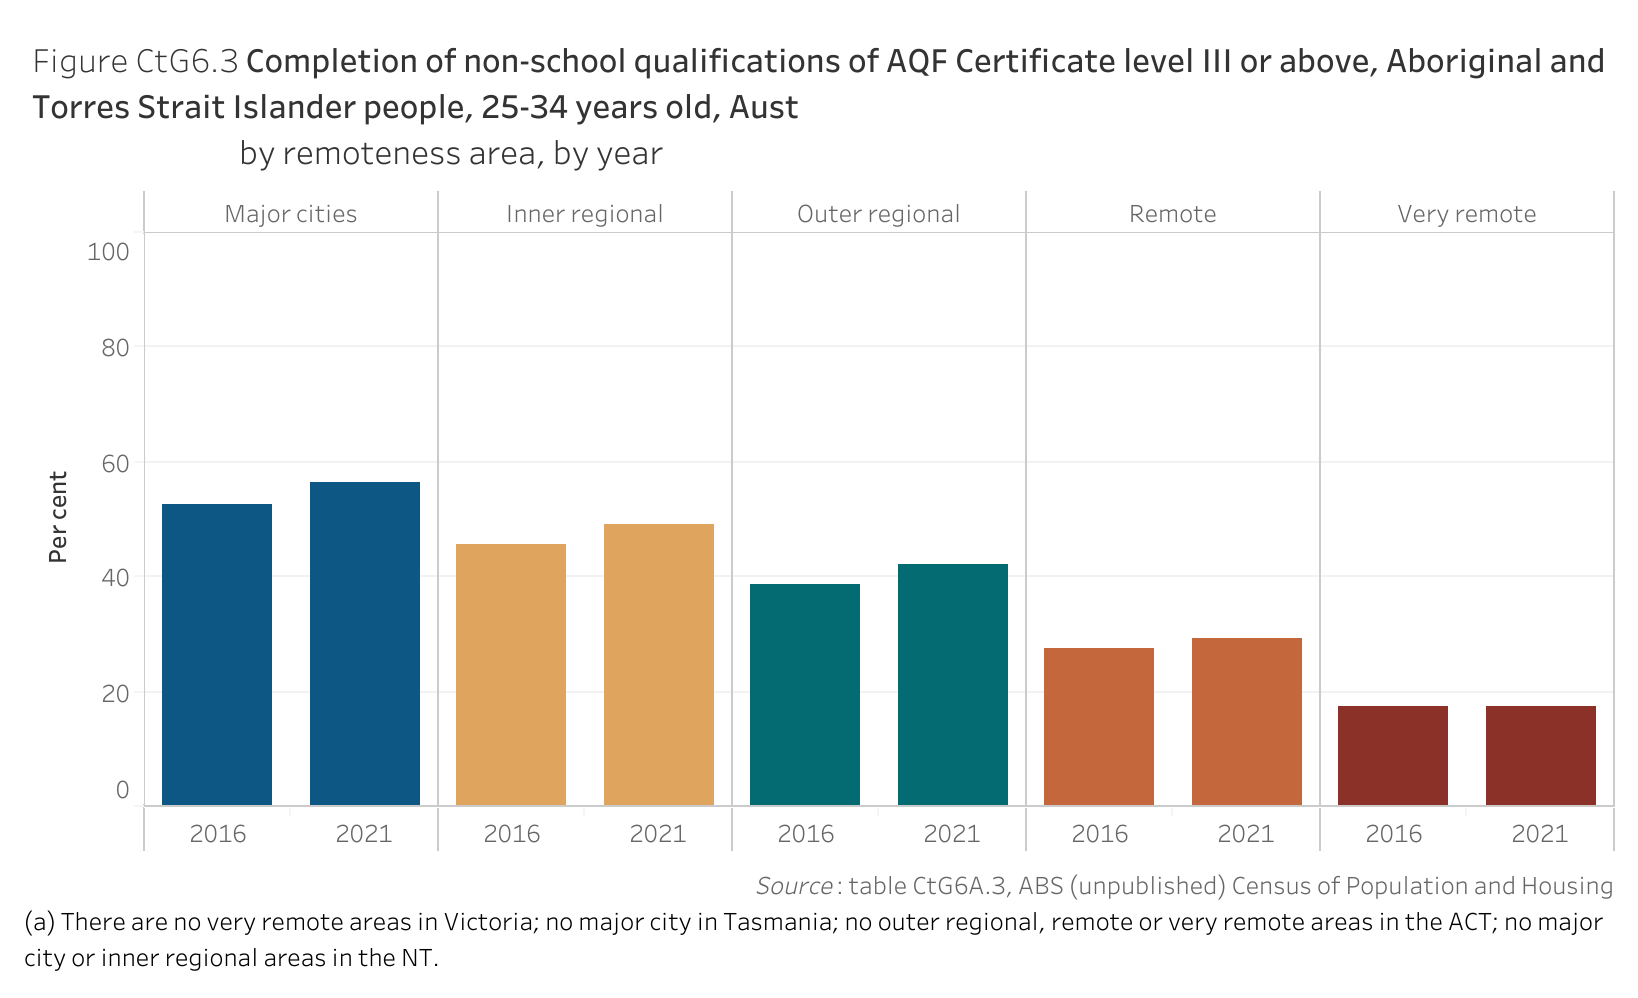 Figure CtG6.3 shows the completion of non-school qualifications of Australian Qualifications Framework Certificate level III or above, Aboriginal and Torres Strait Islander people, 25-34 years old, Australia, by remoteness area, by year. More details can be found within the text near this image.